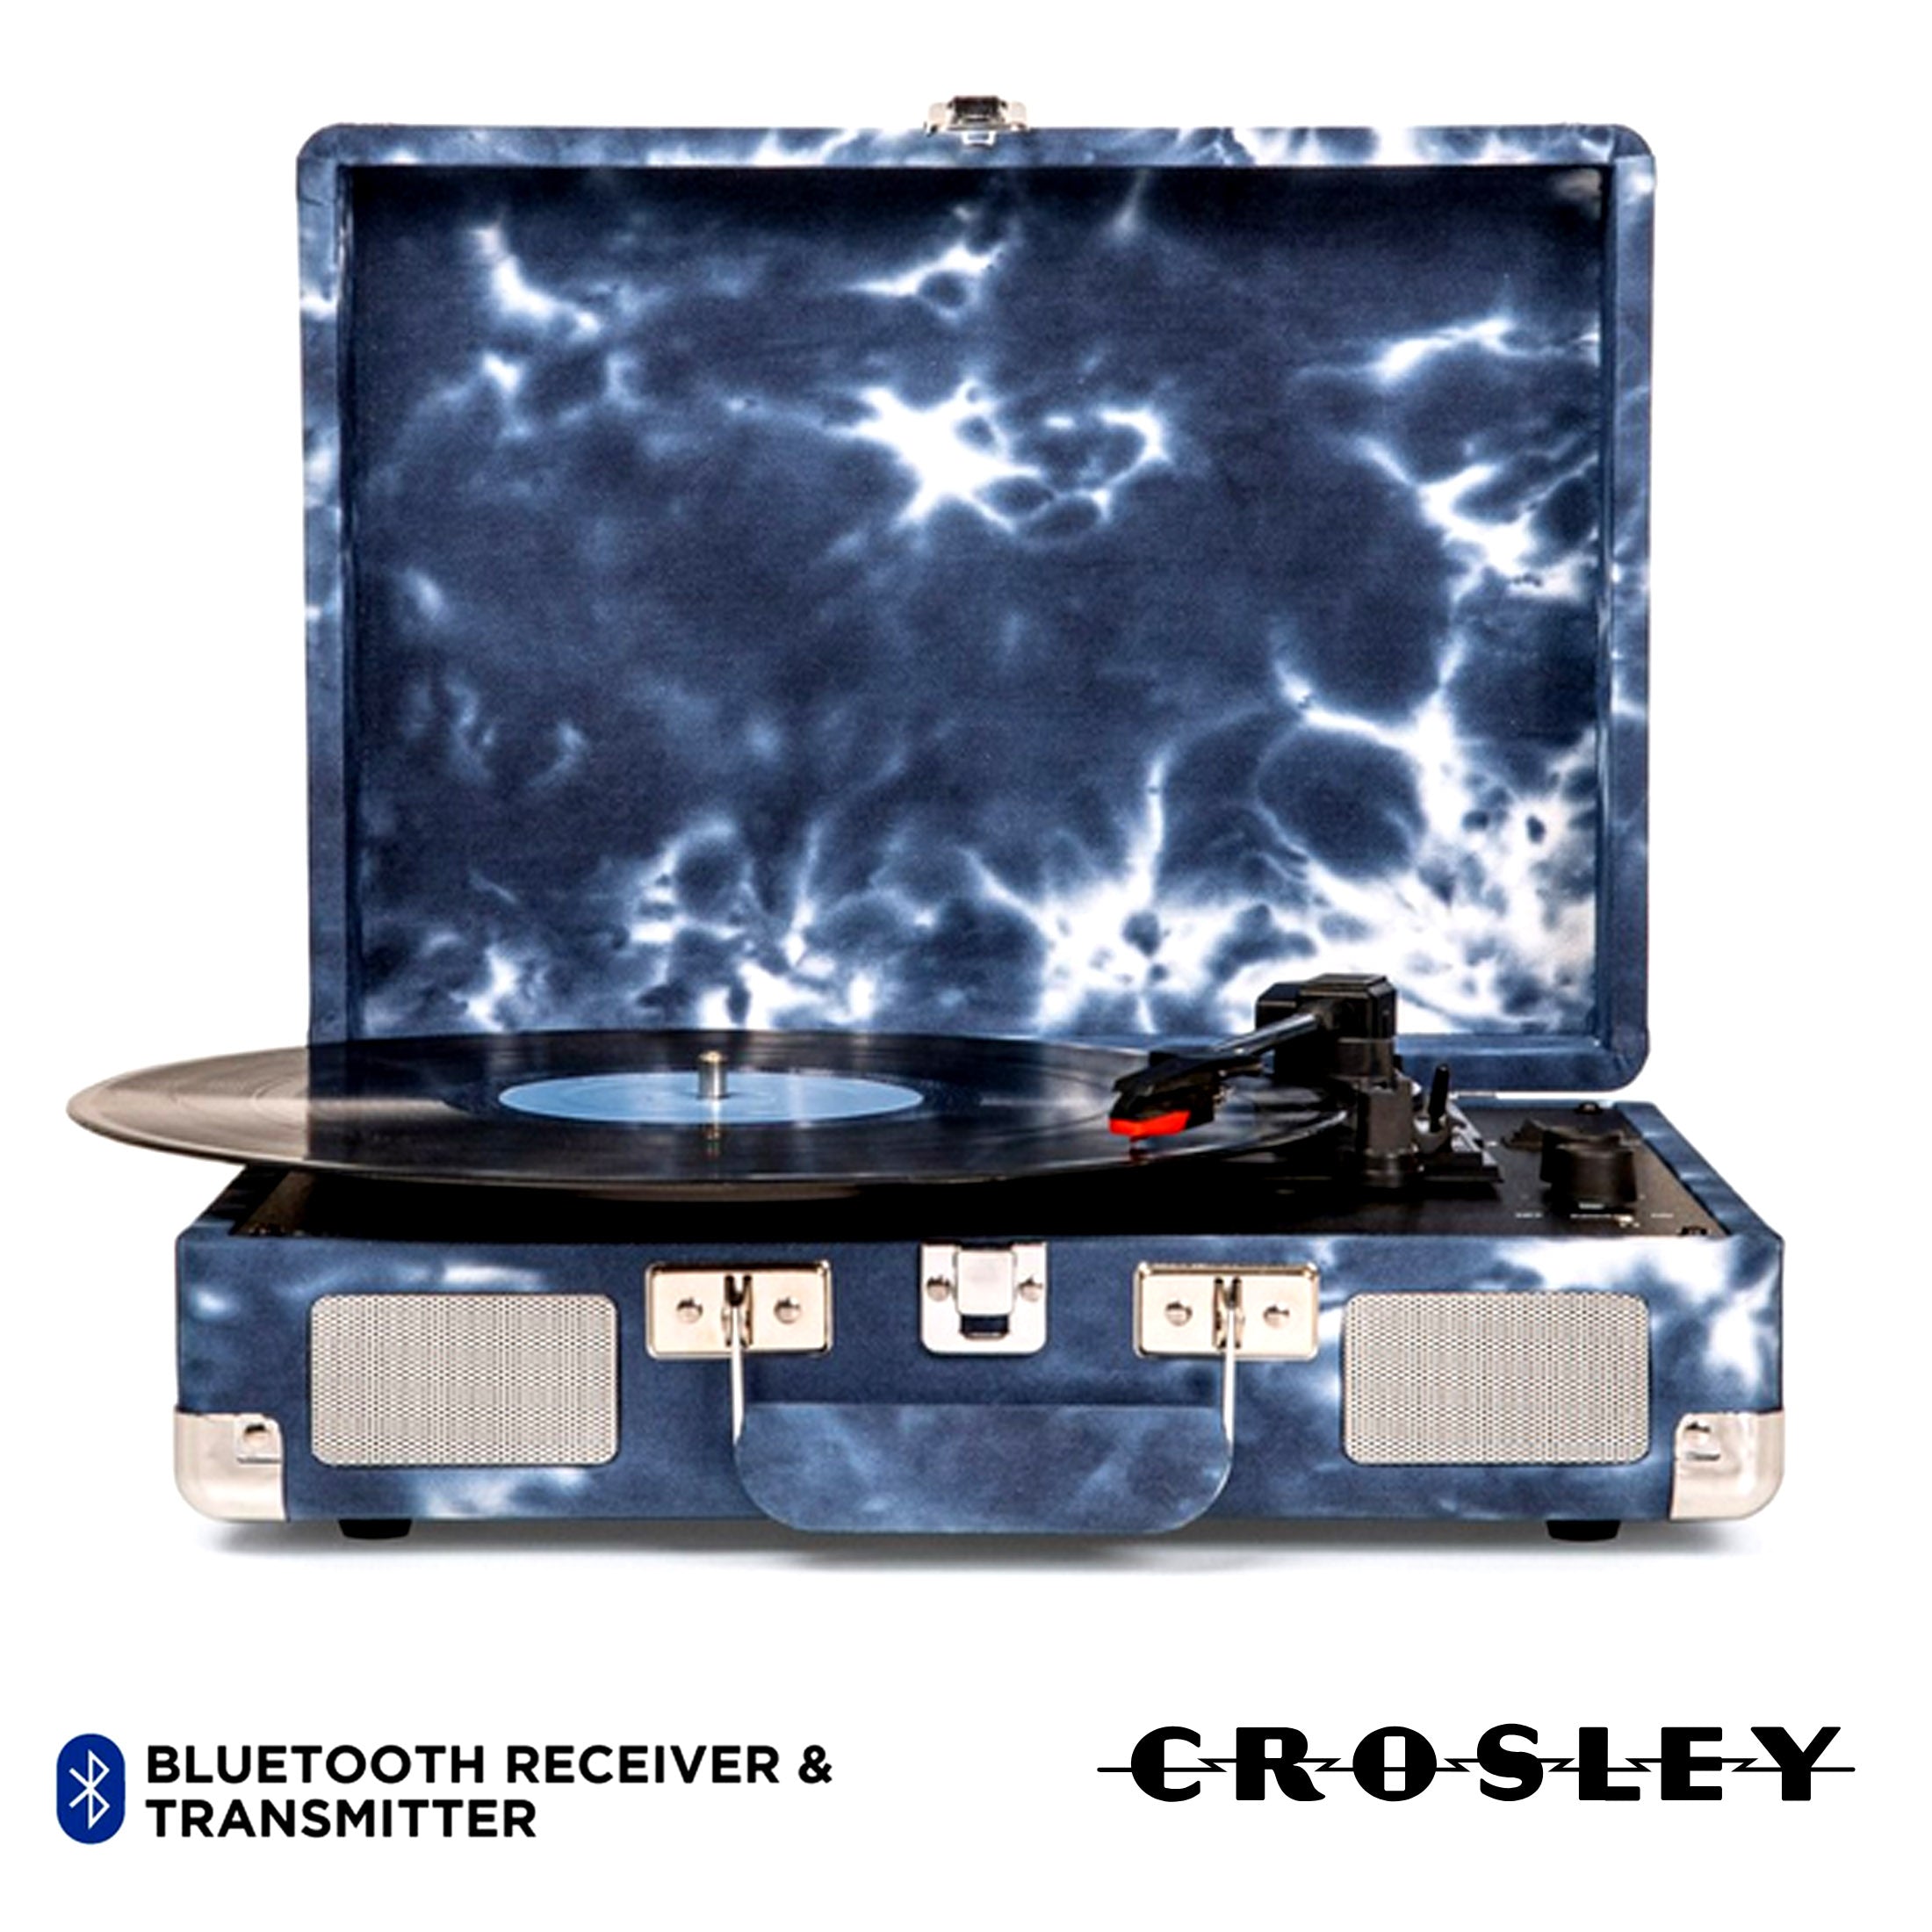 3-Speed Bluetooth Turntable with Stereo Speakers - Crosley Cruiser